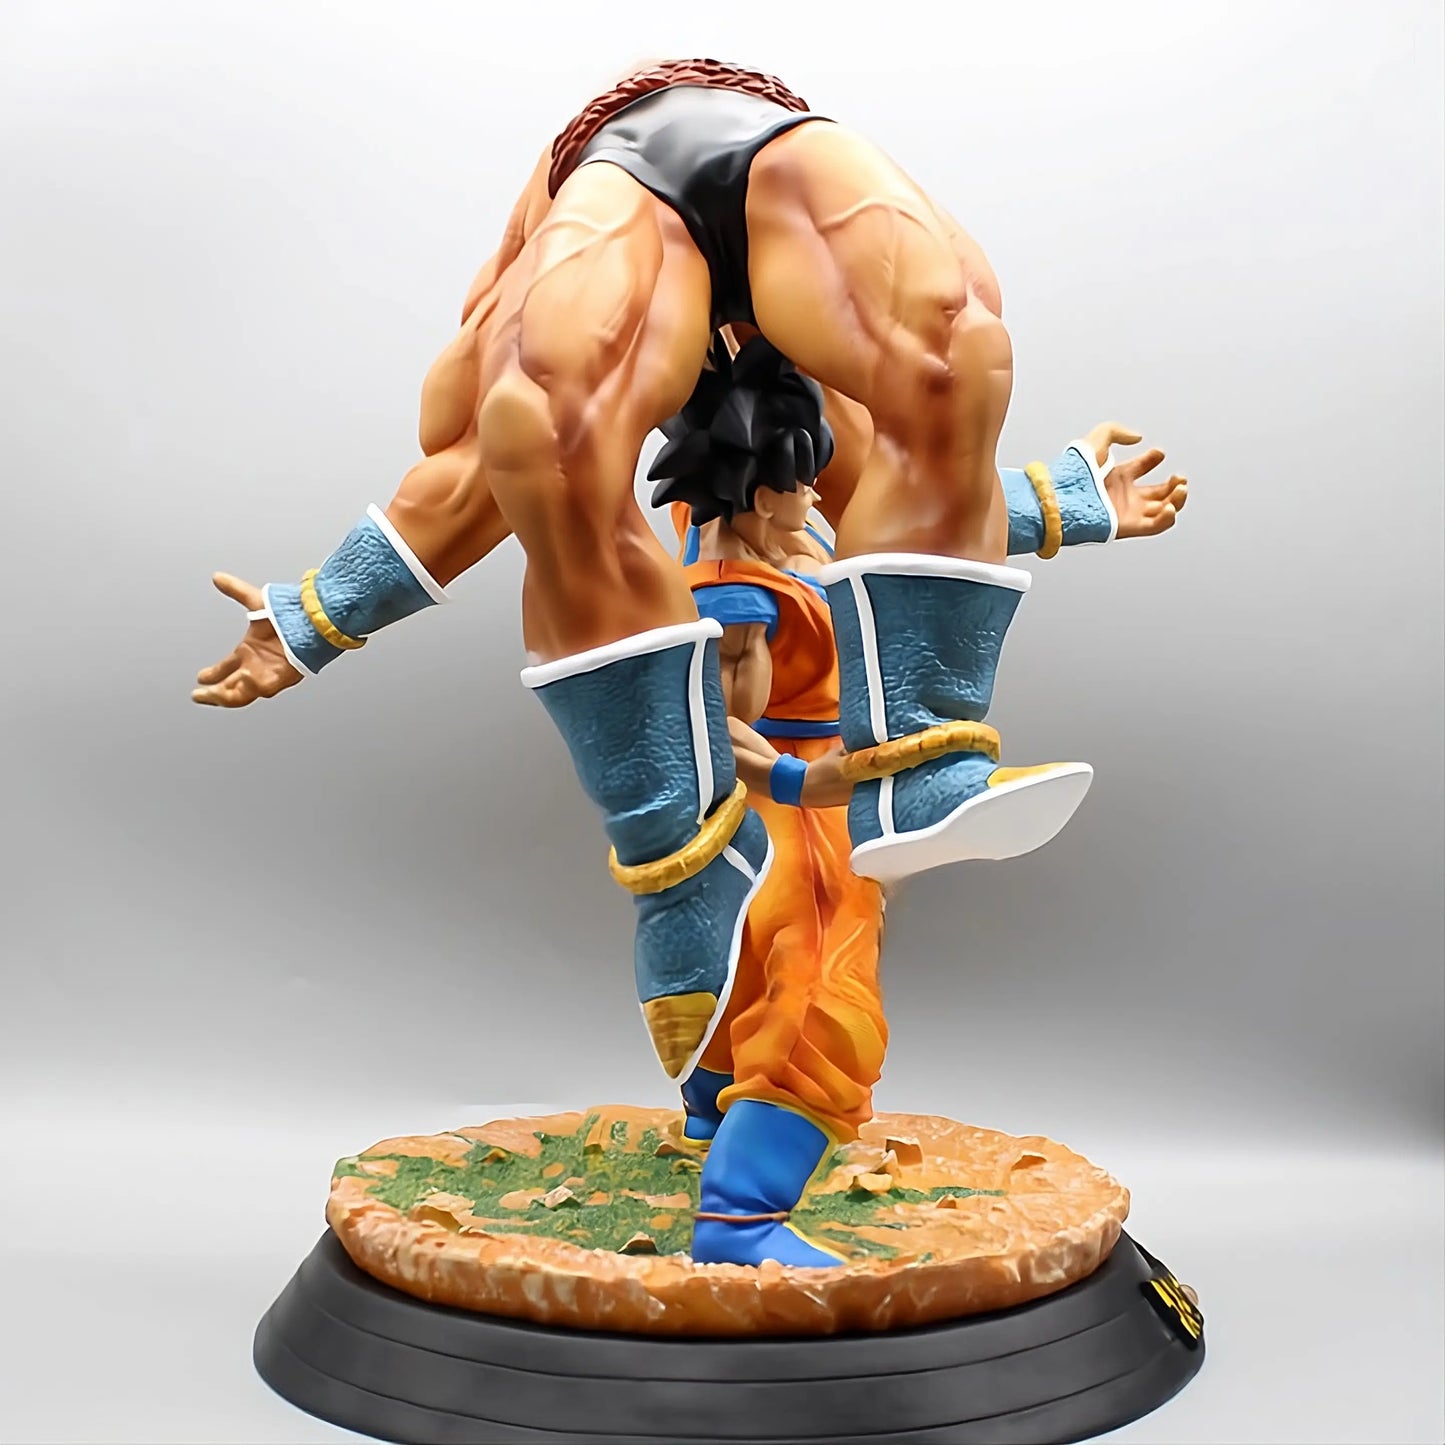 Dramatic angle of Goku standing defiant in front of the mighty Nappa, showcasing his strength and determination in the Dragon Ball collectible figure series.